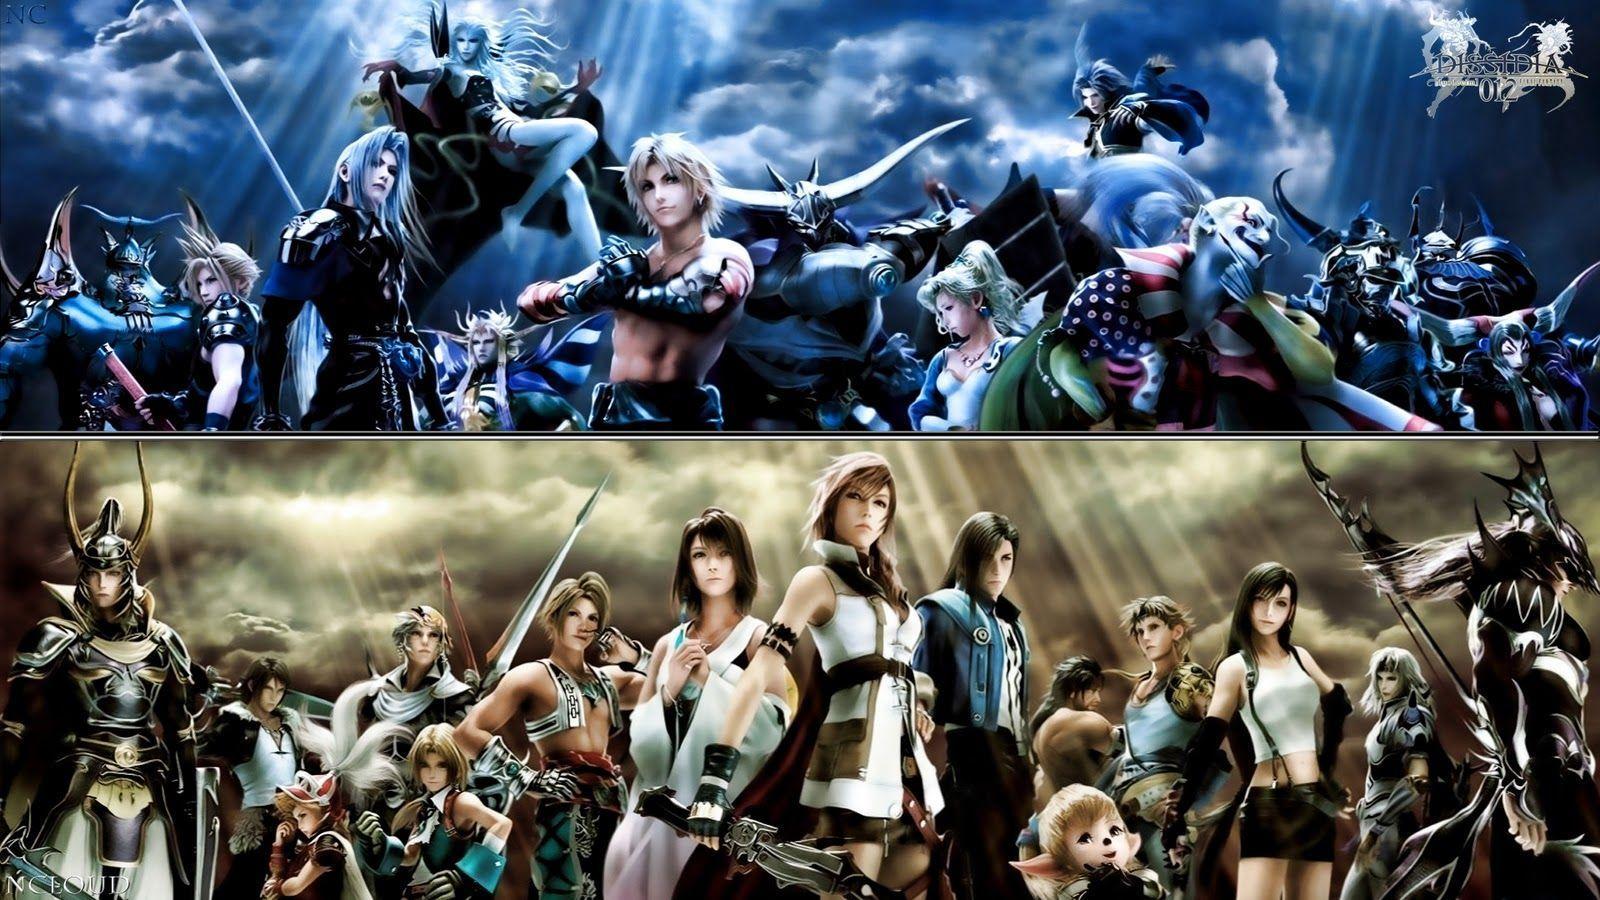 Image For > Final Fantasy Dissidia Wallpapers Cloud